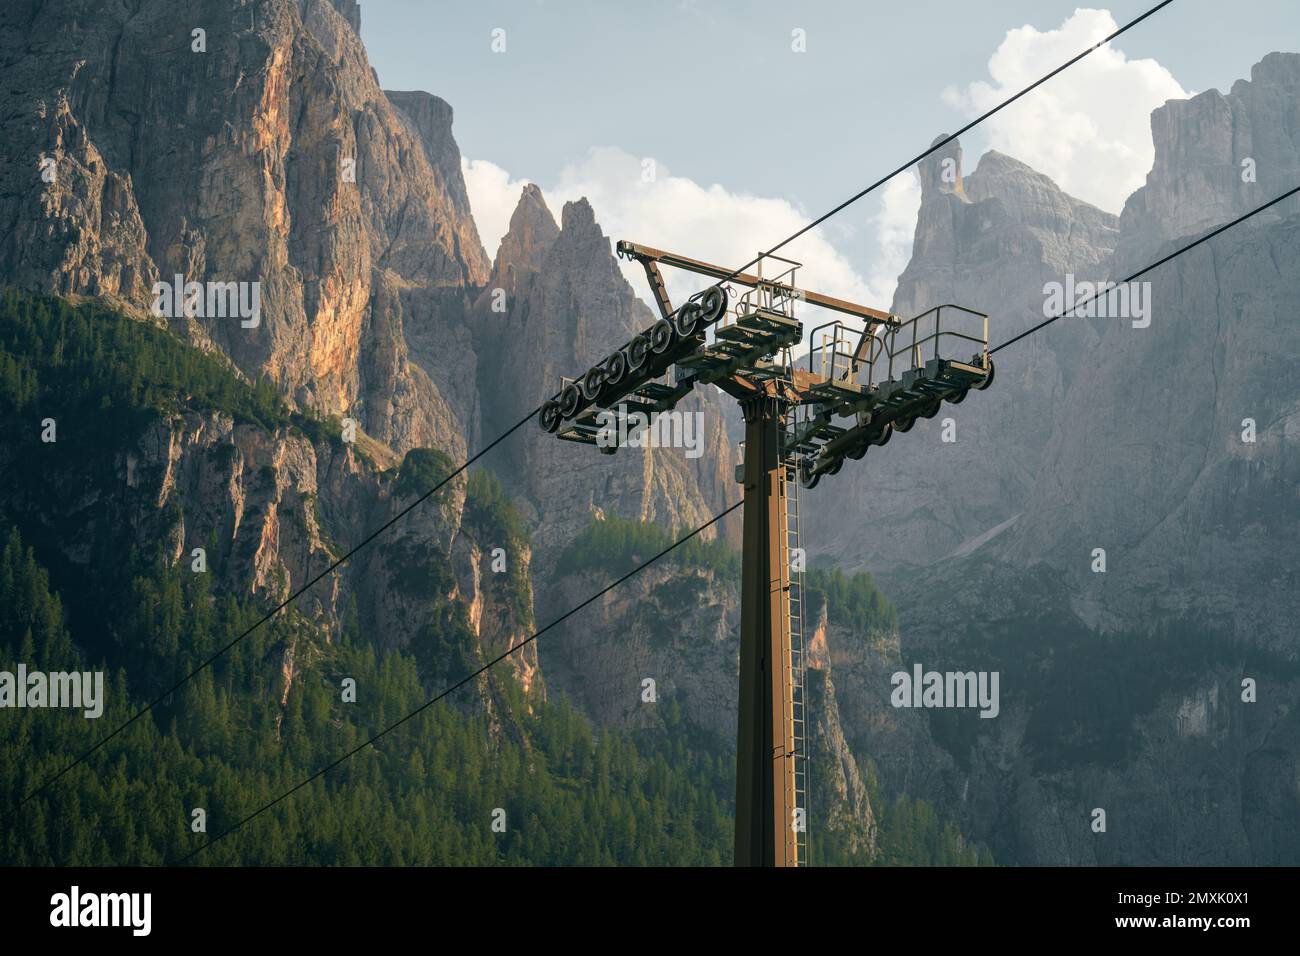 A low-angle of Palm Springs aerial tramway with a sunny and misty mountains and sky background Stock Photo